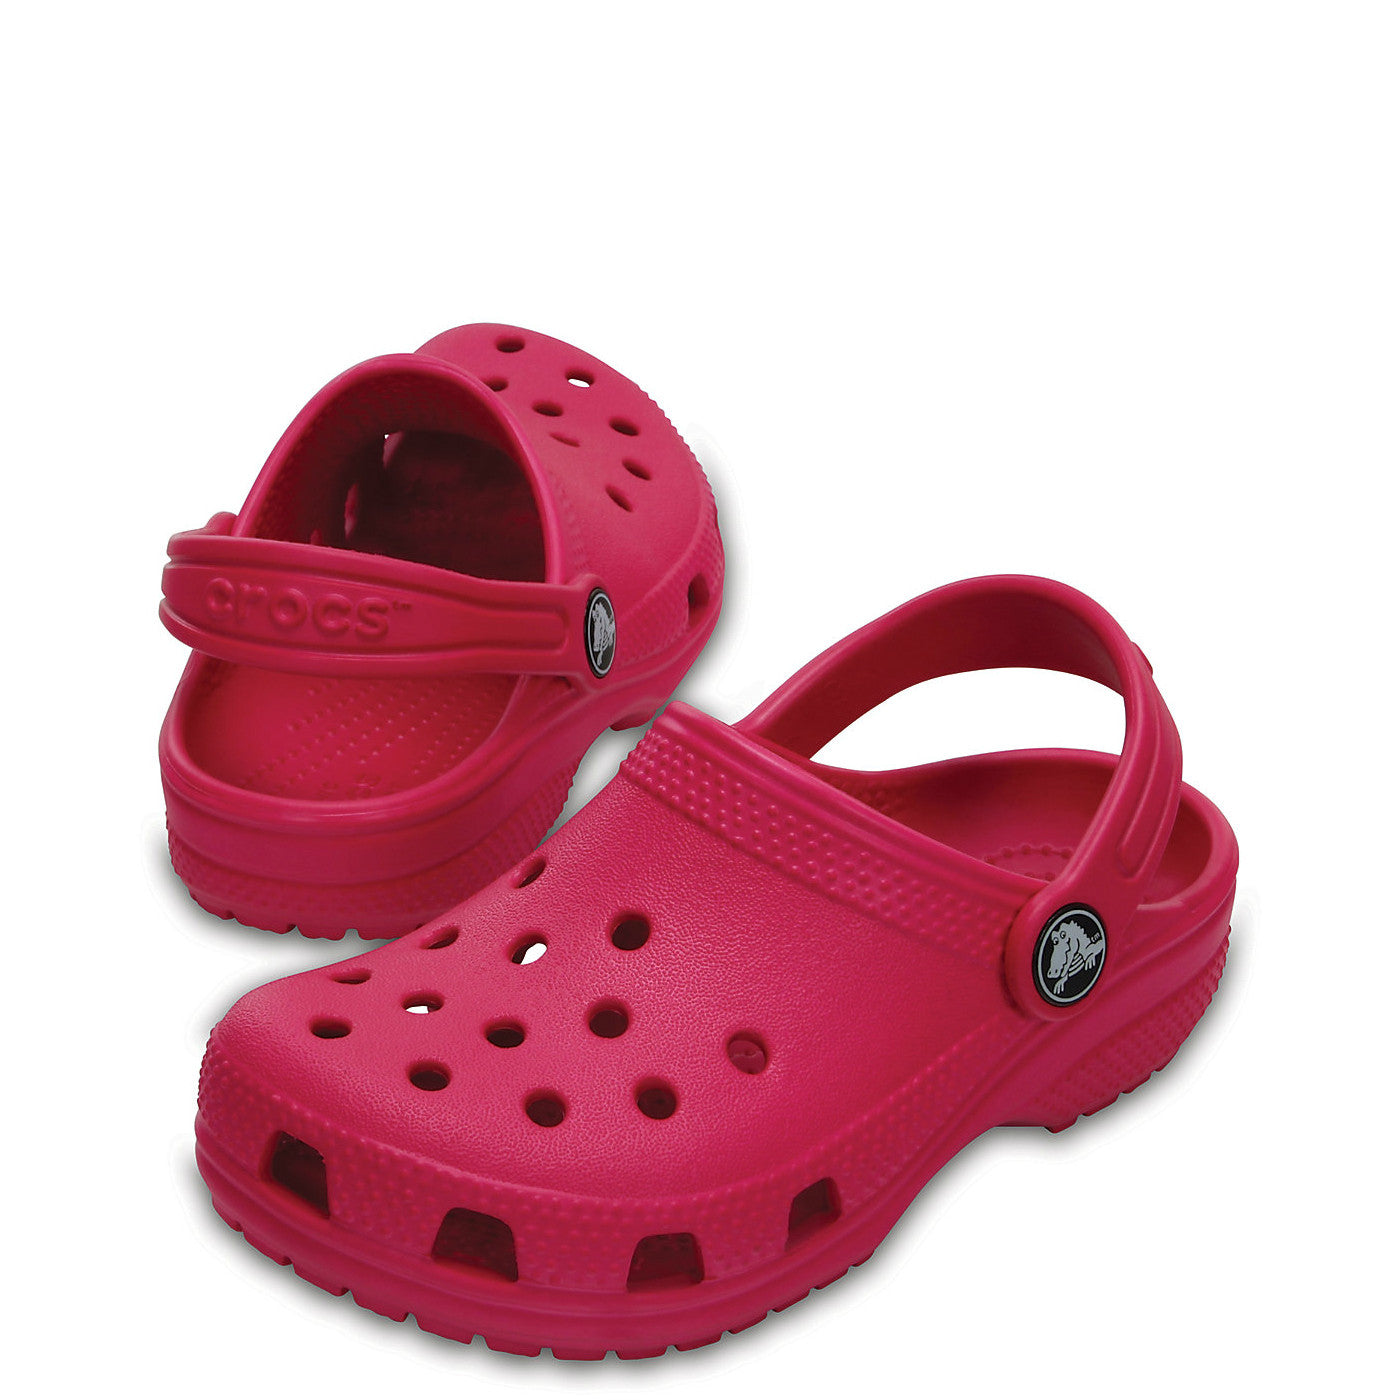 candy pink crocs Online shopping has 